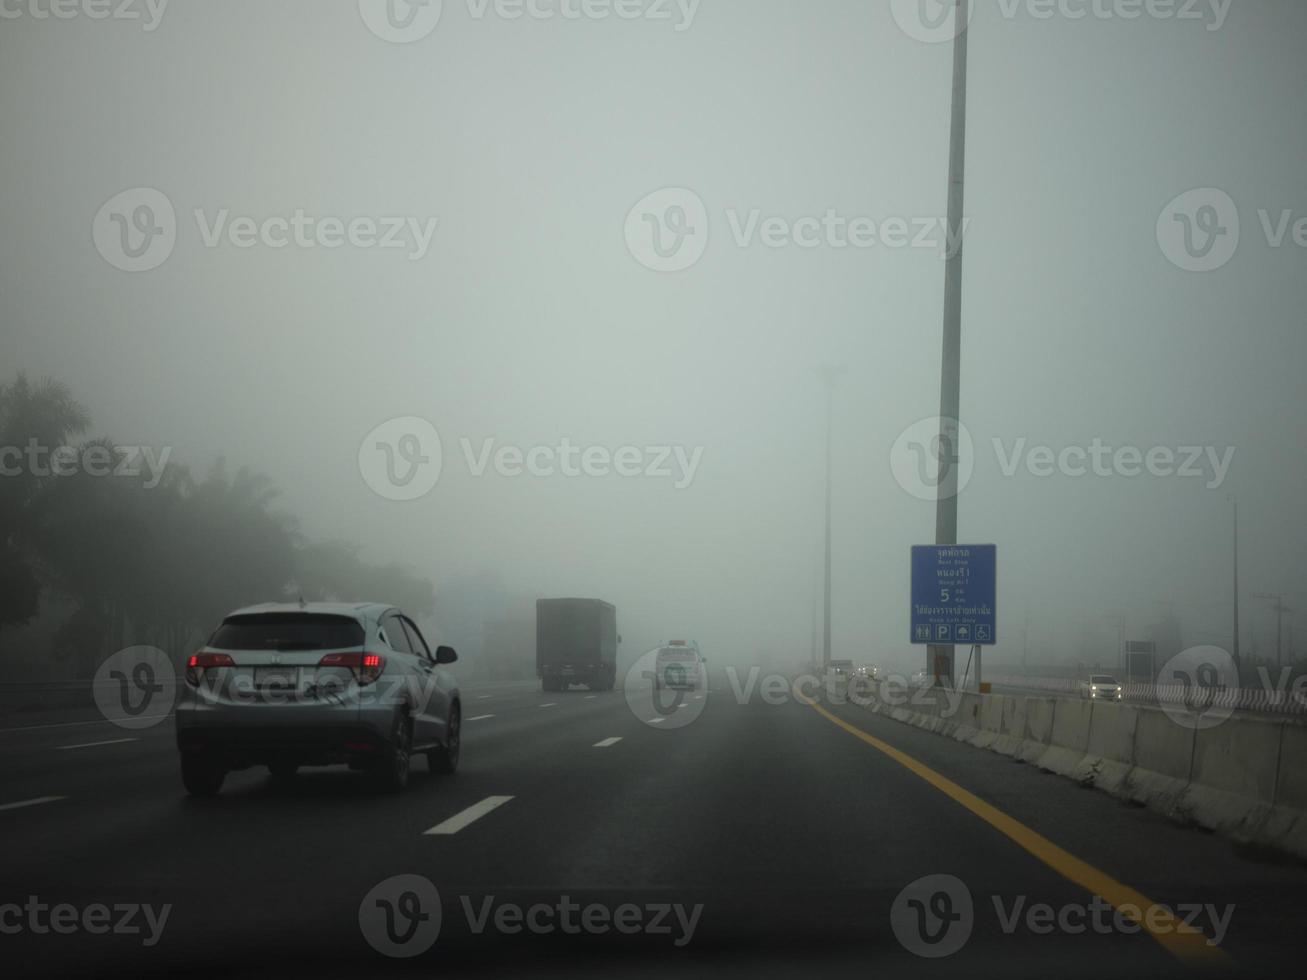 Road in the fog, sign mention keep distance for Motorway-t7.svg photo